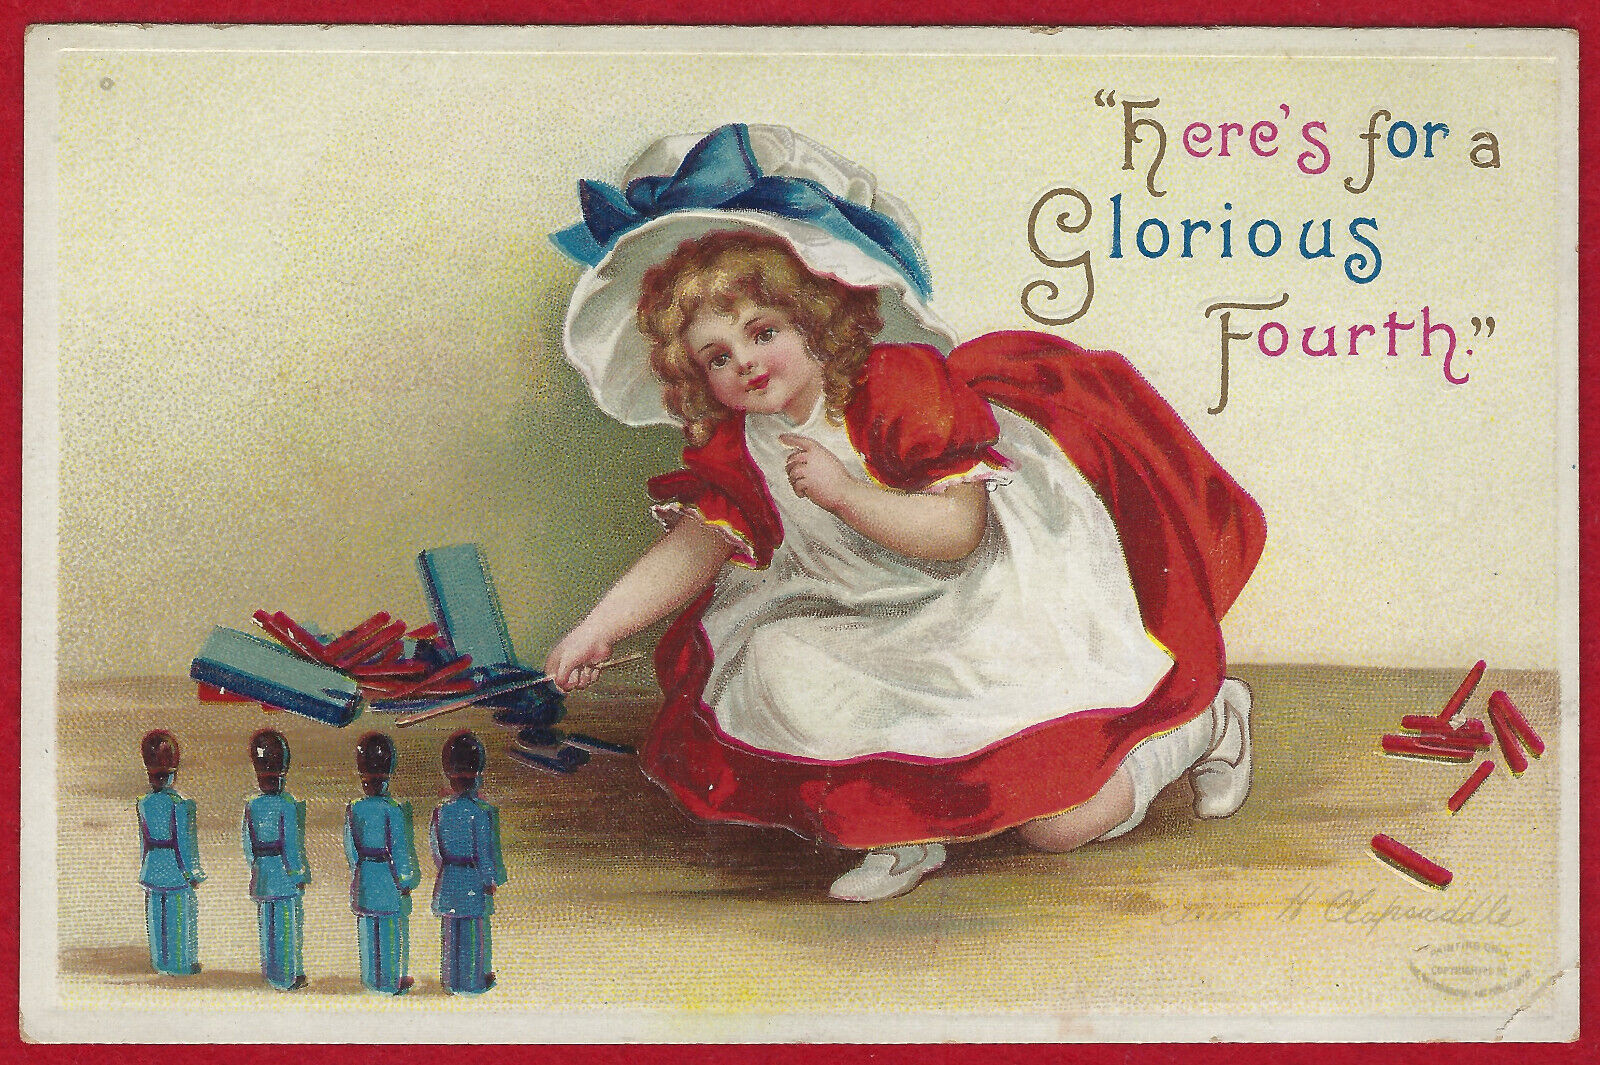 Clapsaddle July 4th Girl Toy Soldiers Fireworks A/S Emb Gilded PC Vintage c1910